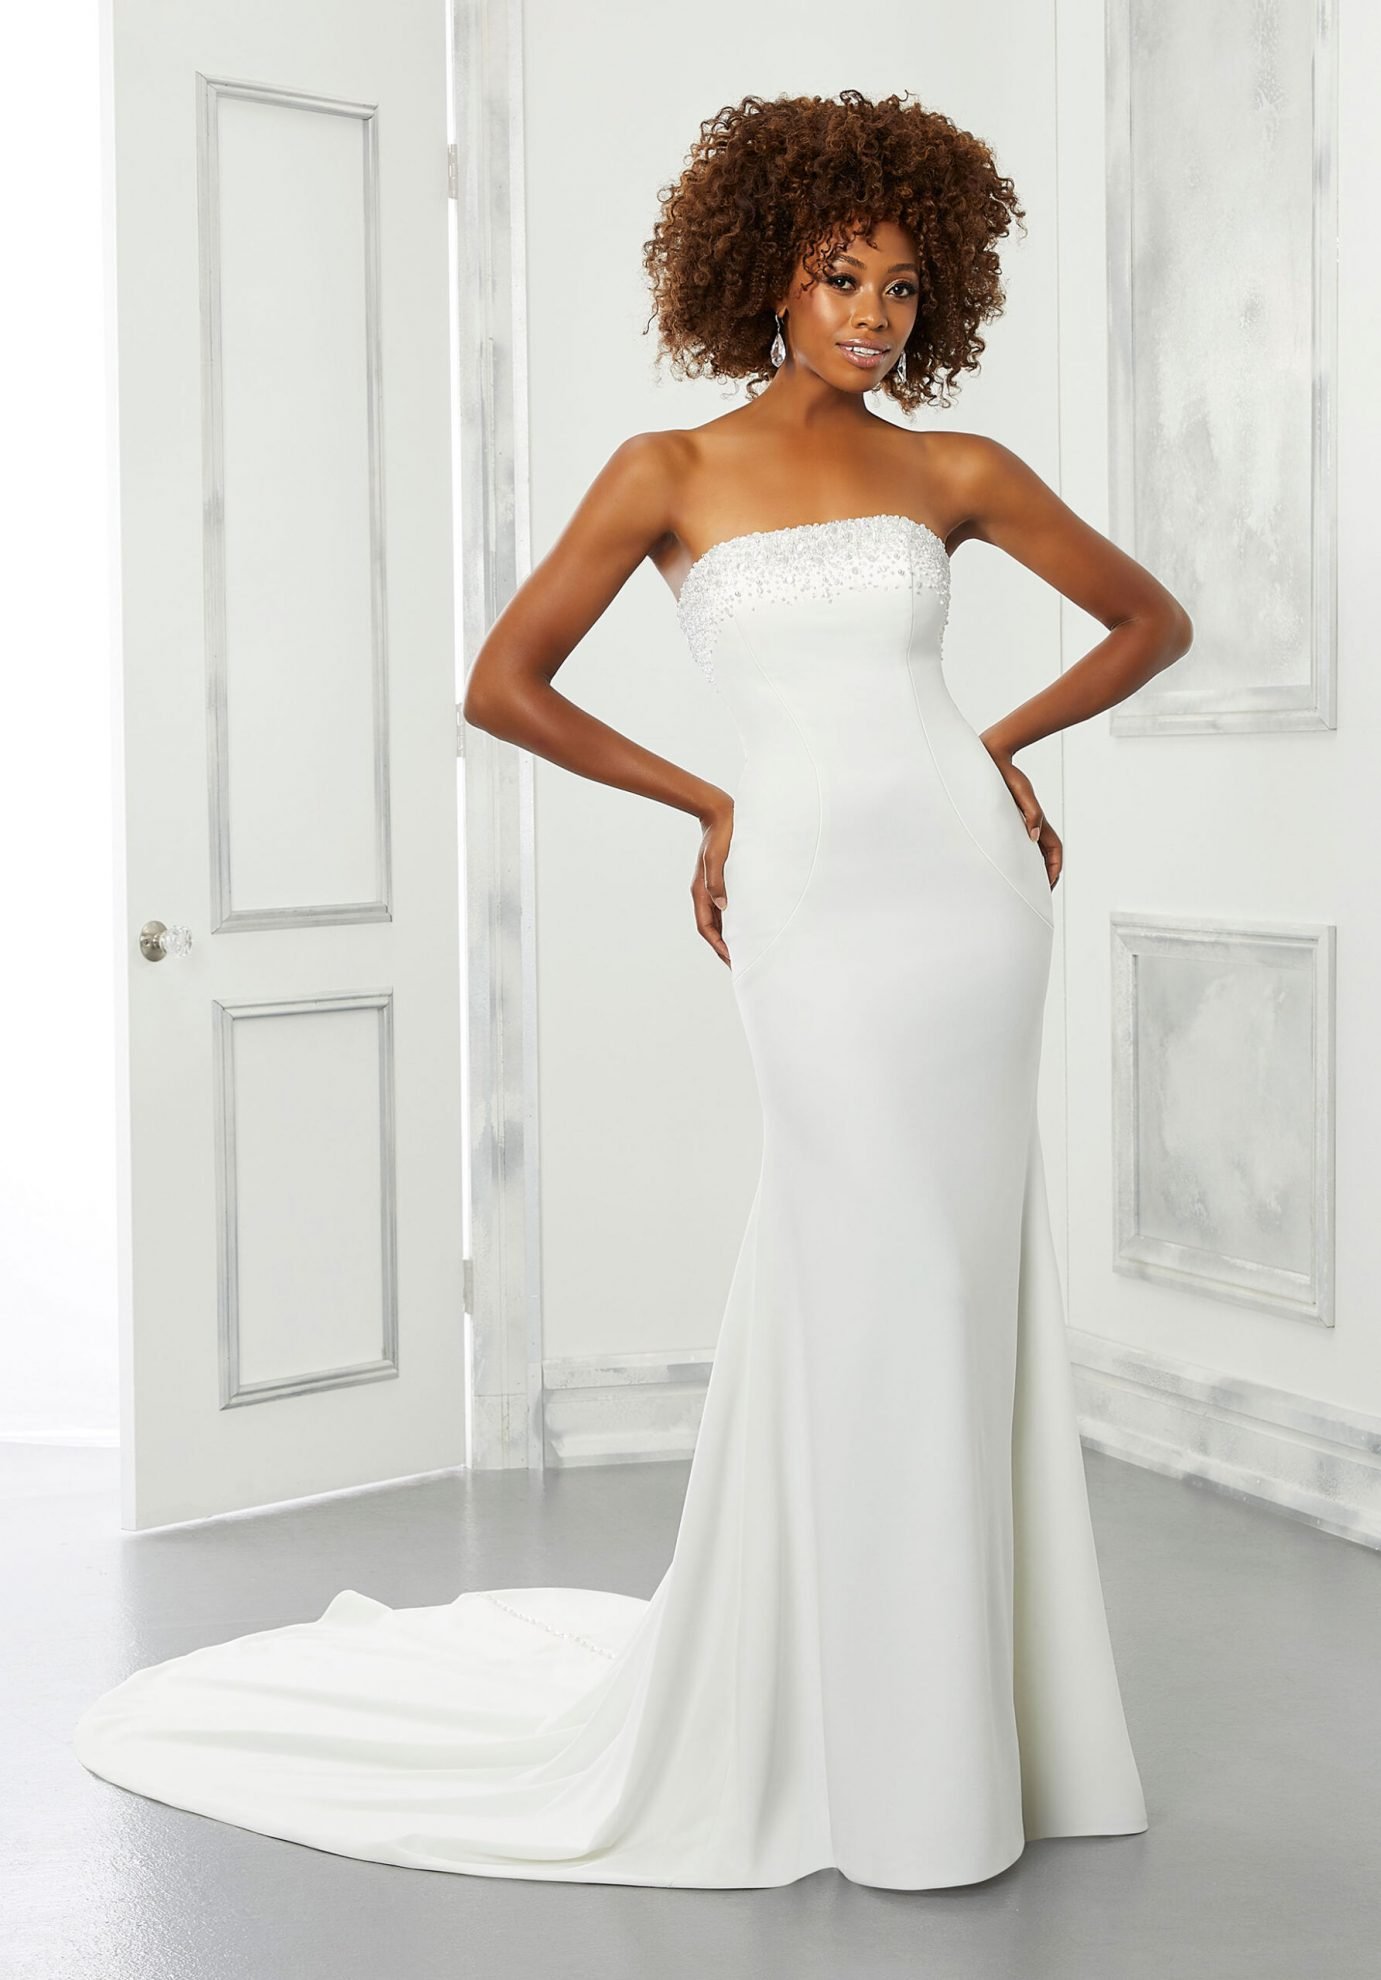 20 Strapless Wedding Dresses That Are Oh-So Gorgeous - Wedding Journal